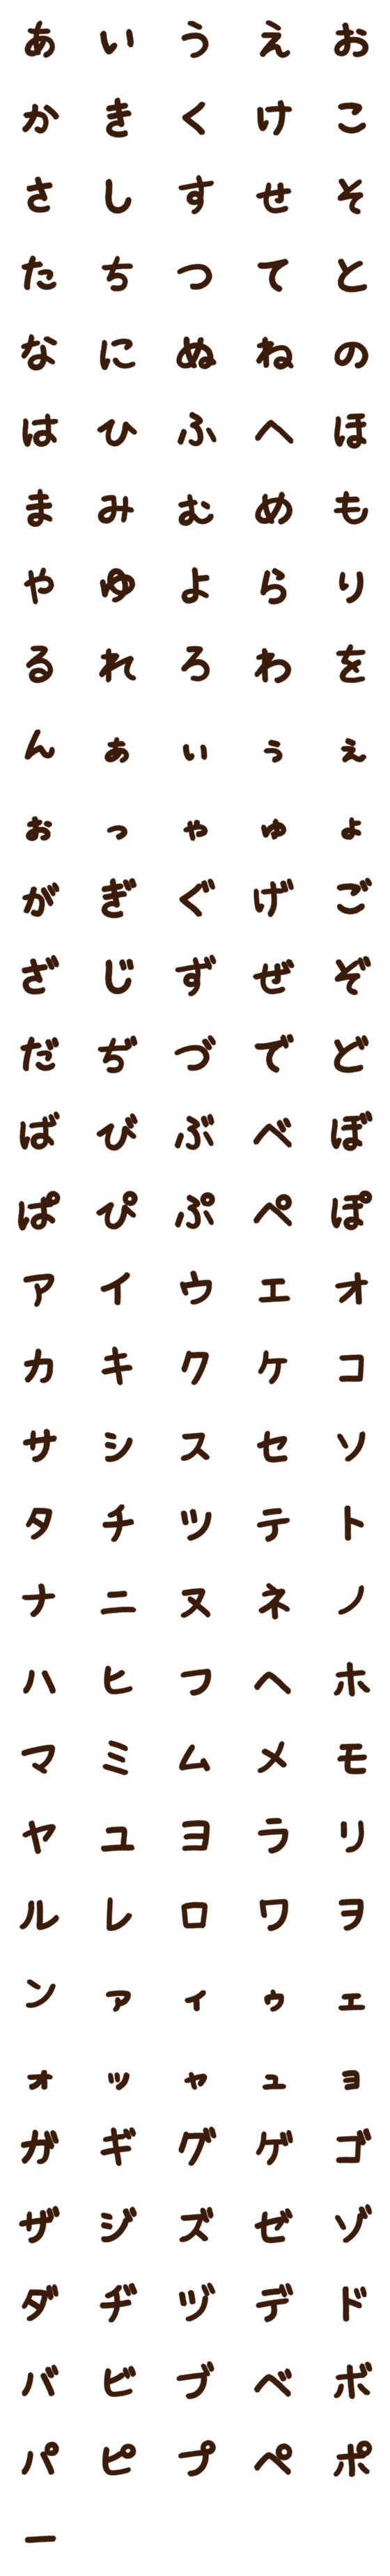 [LINE絵文字]おにぎり文字の画像一覧